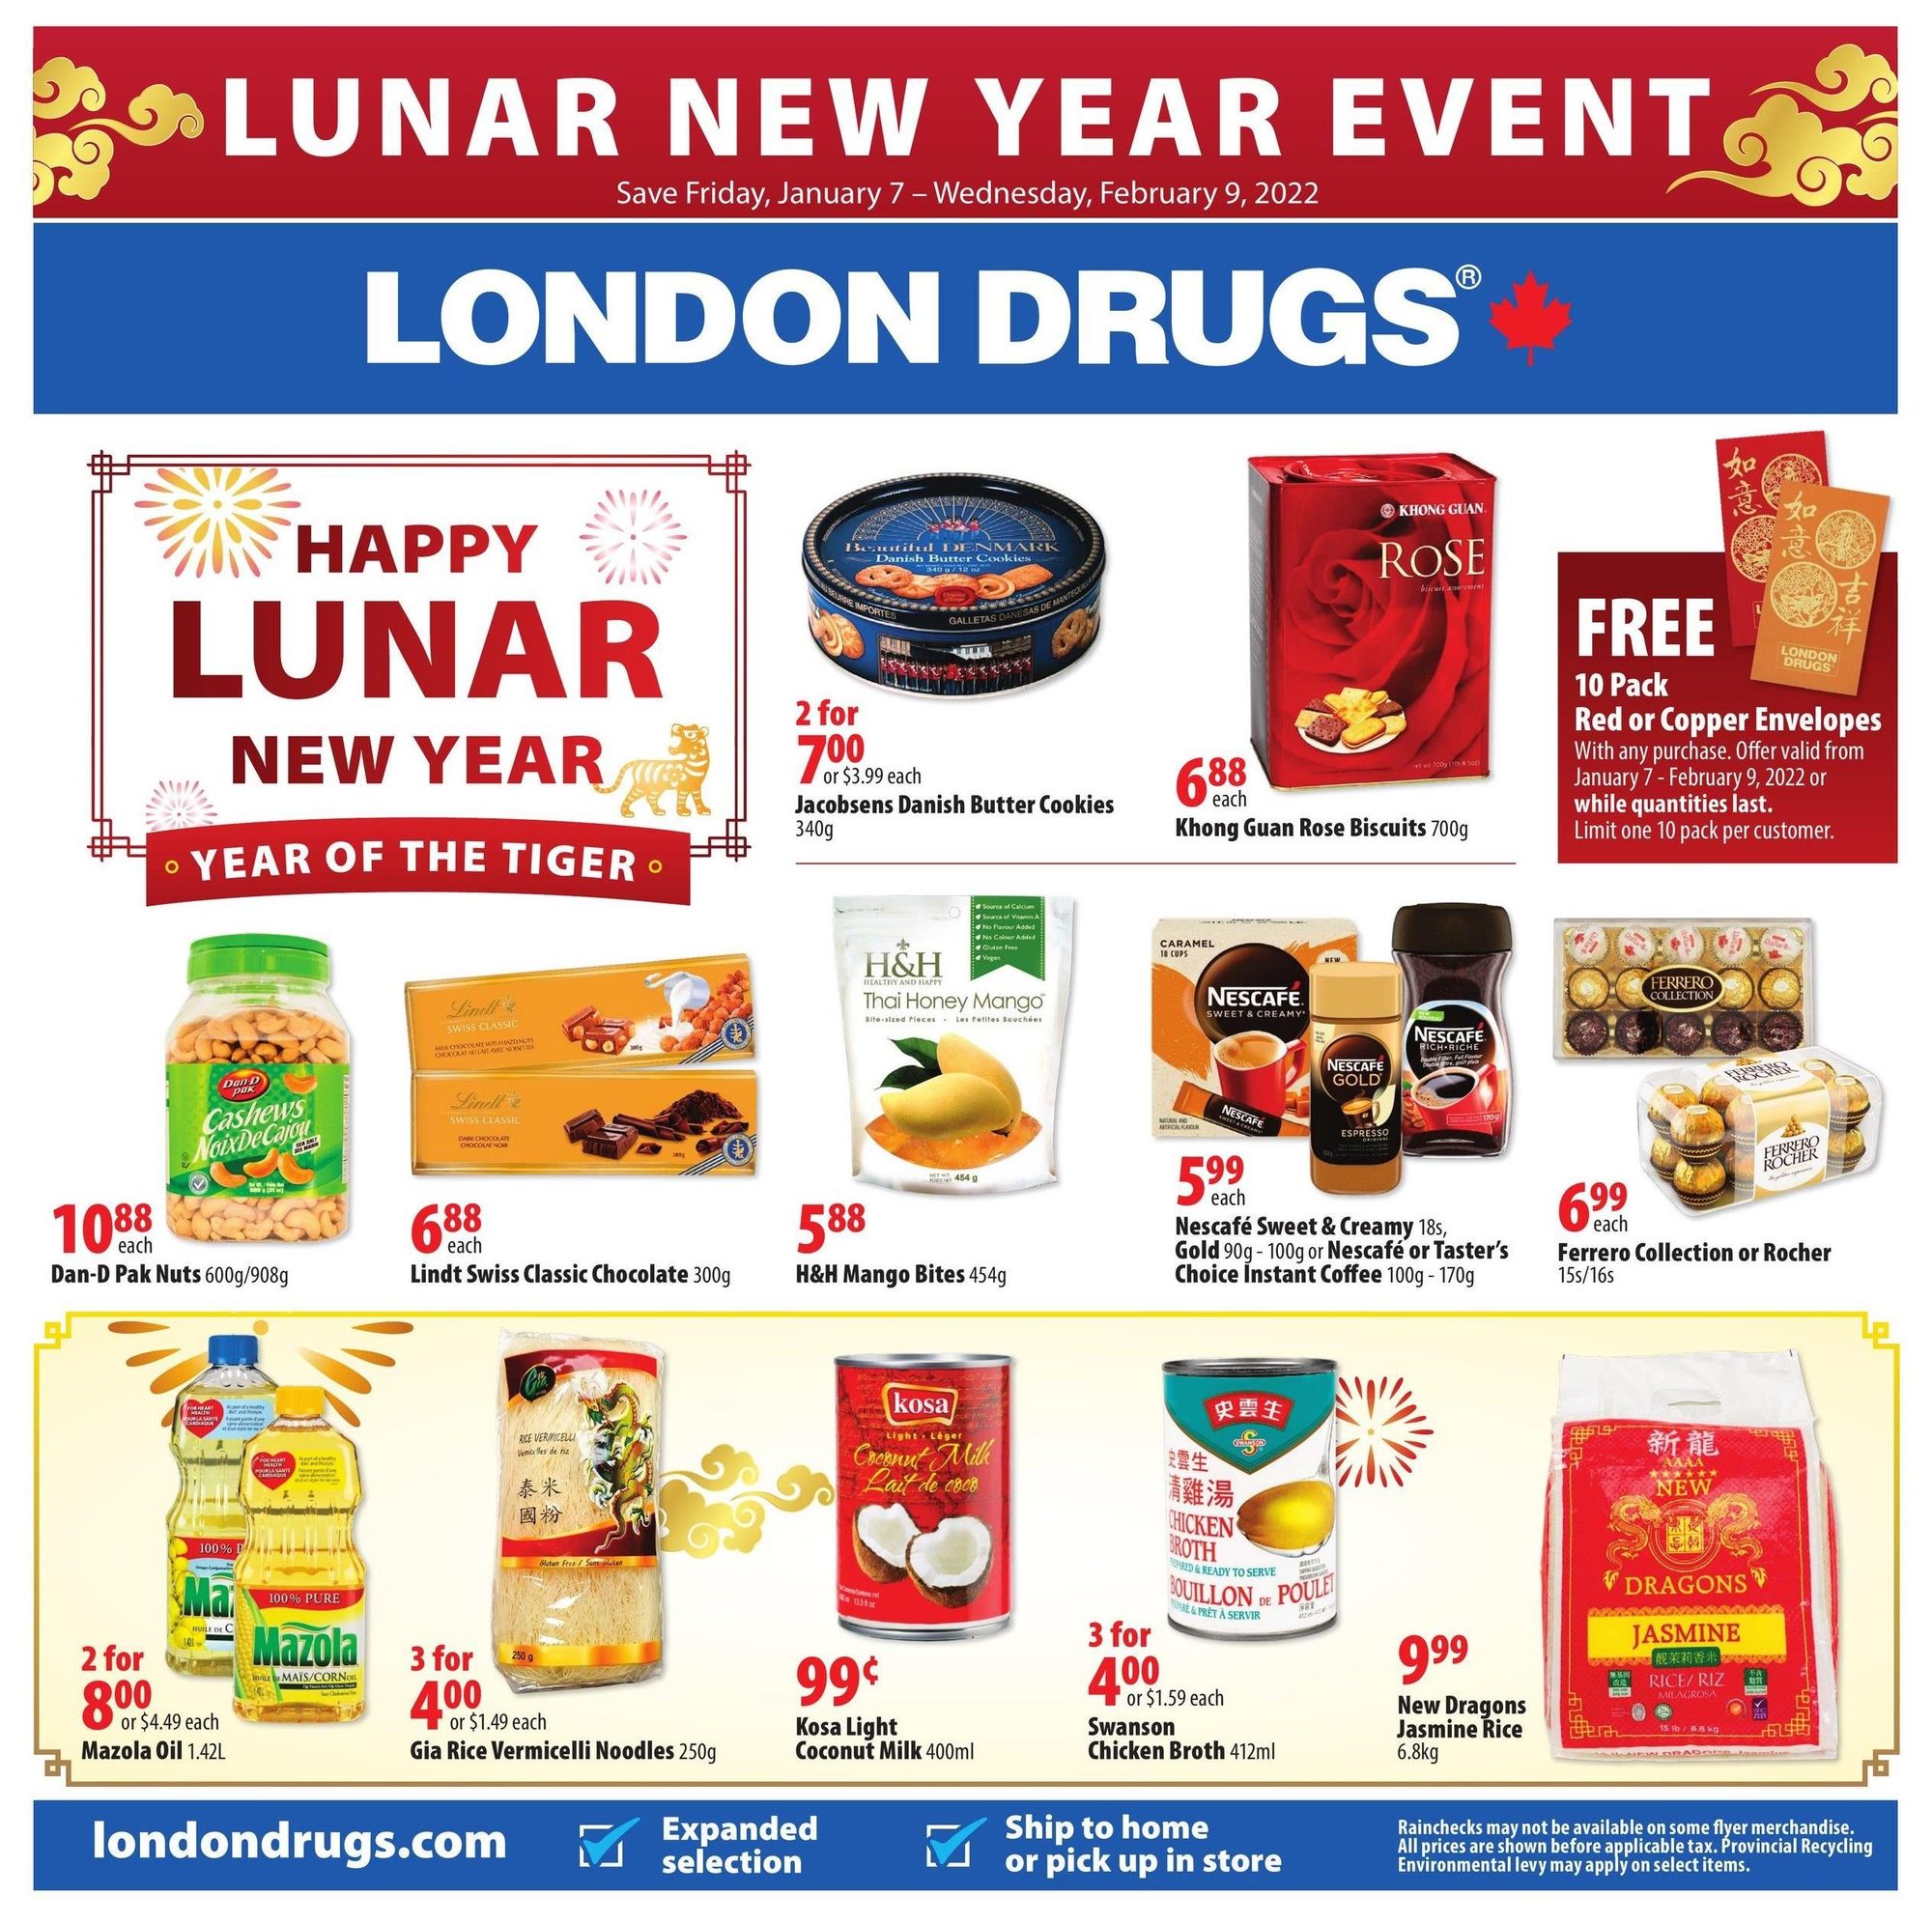 London Drugs - Lunar New Year Event